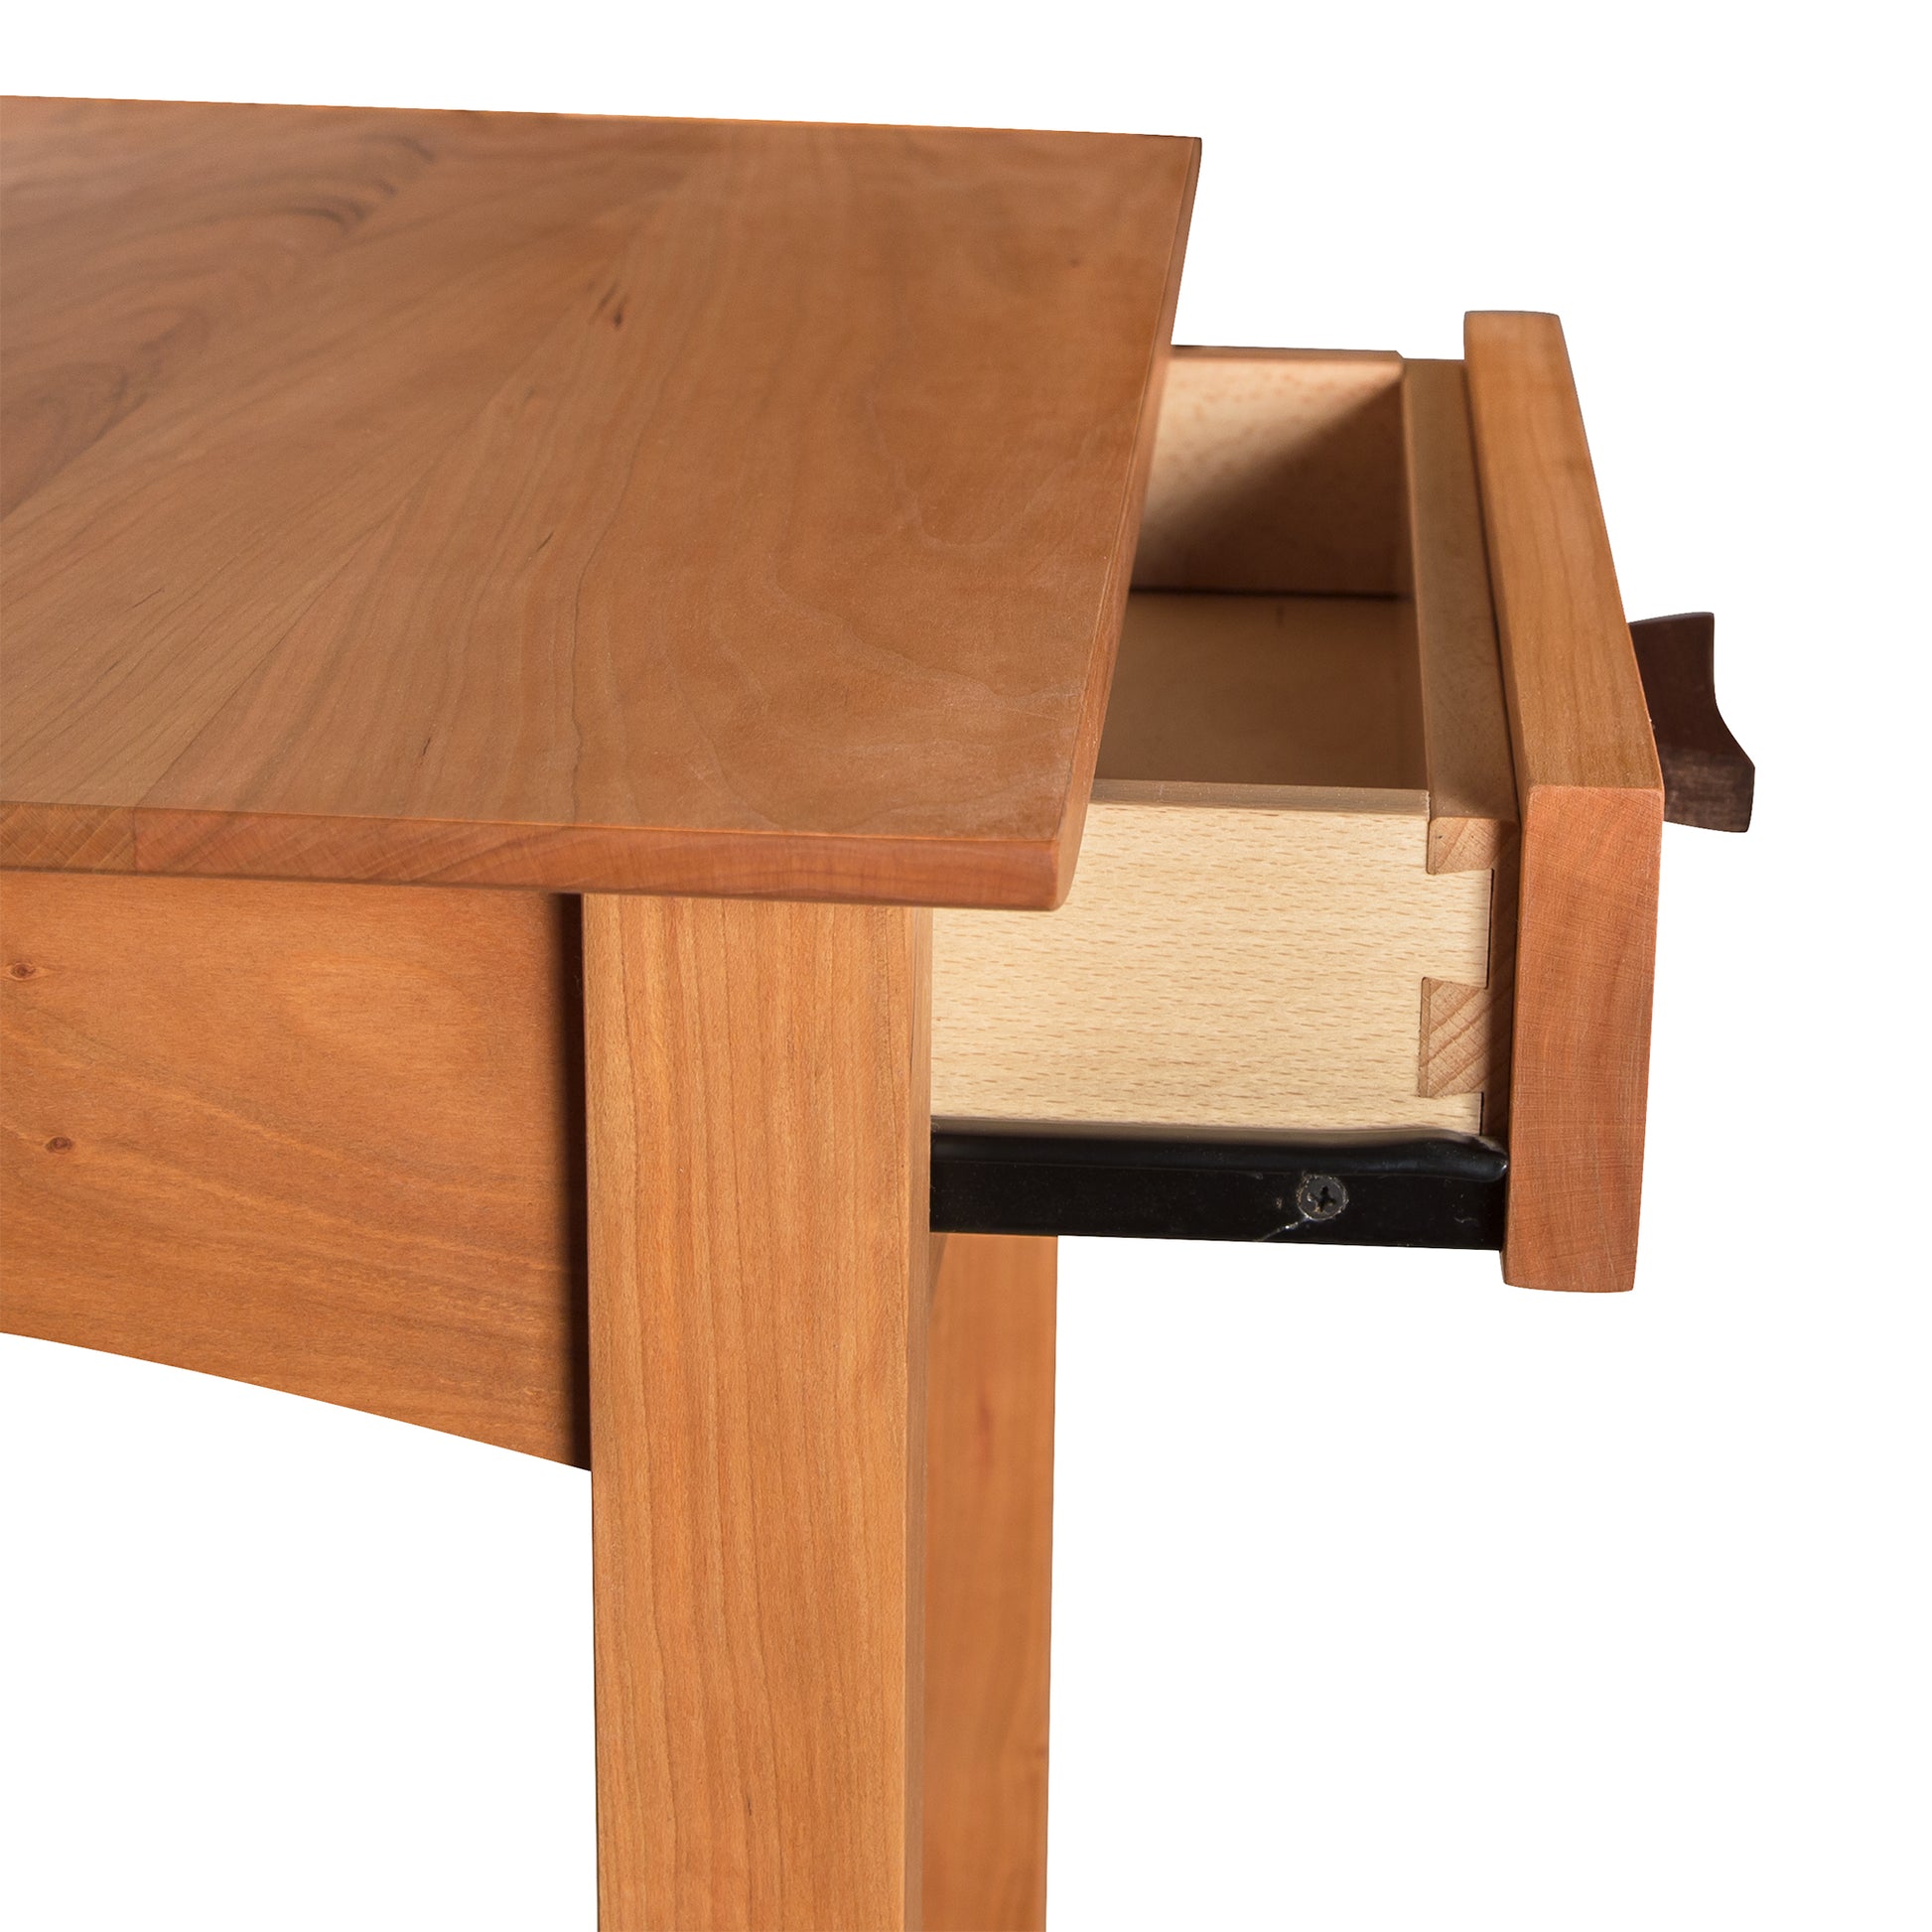 Contemporary Craftsman 1-Drawer Open Shelf Nightstand from Vermont Furniture Designs, showcasing its construction and joinery, against a white background.